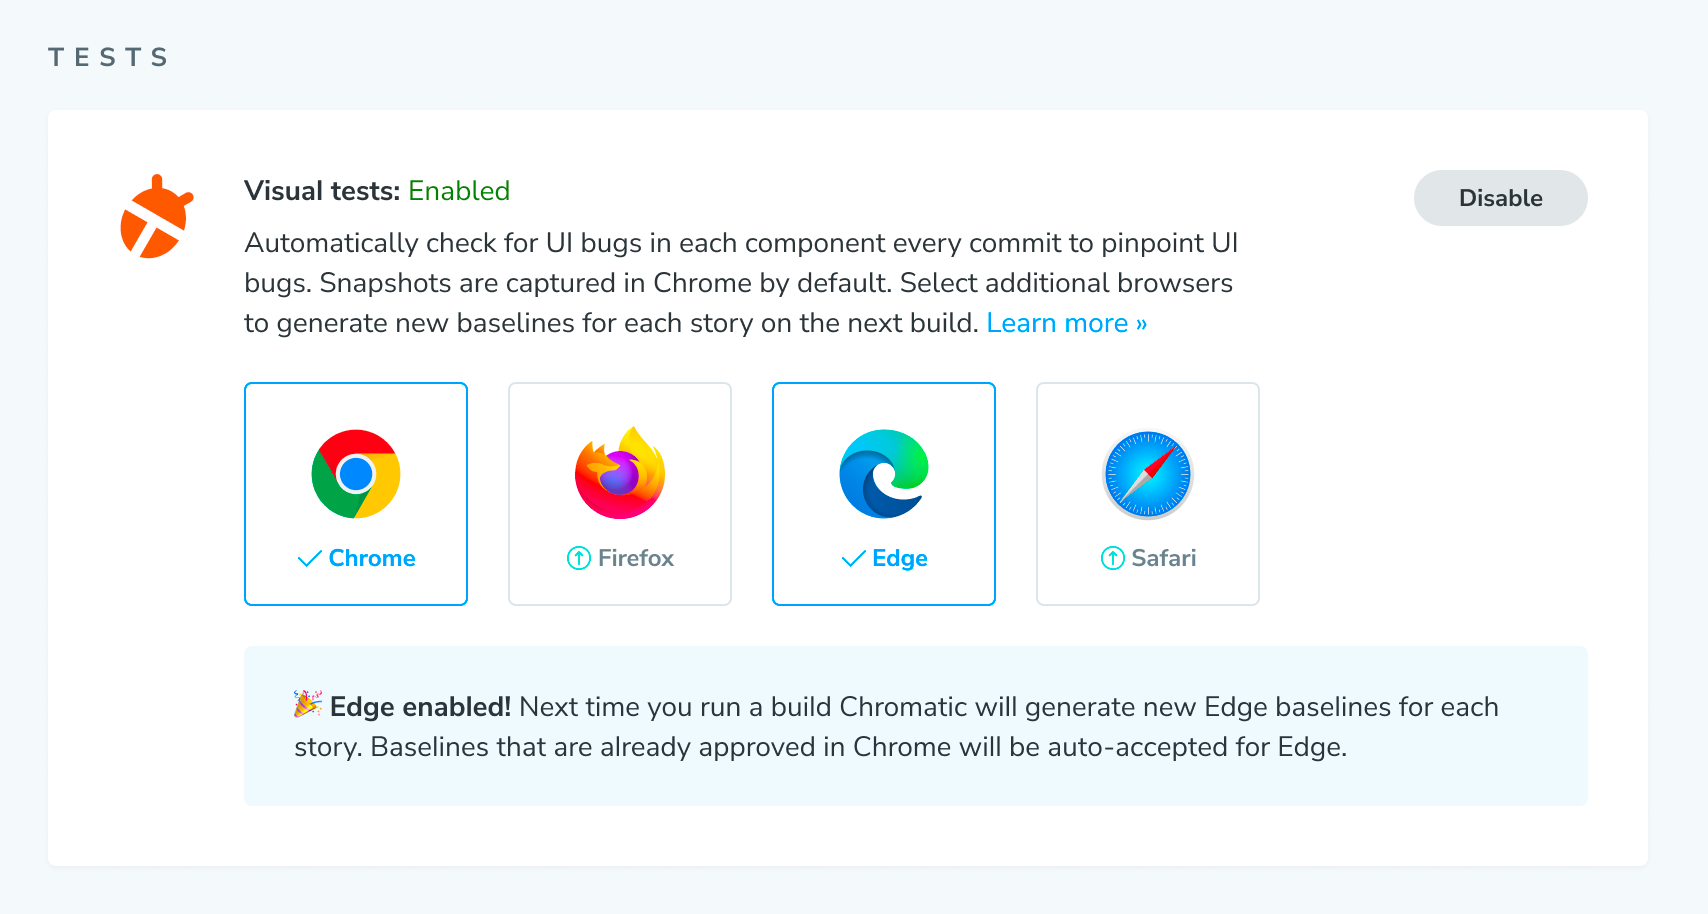 The browser selection screen in Chromatic